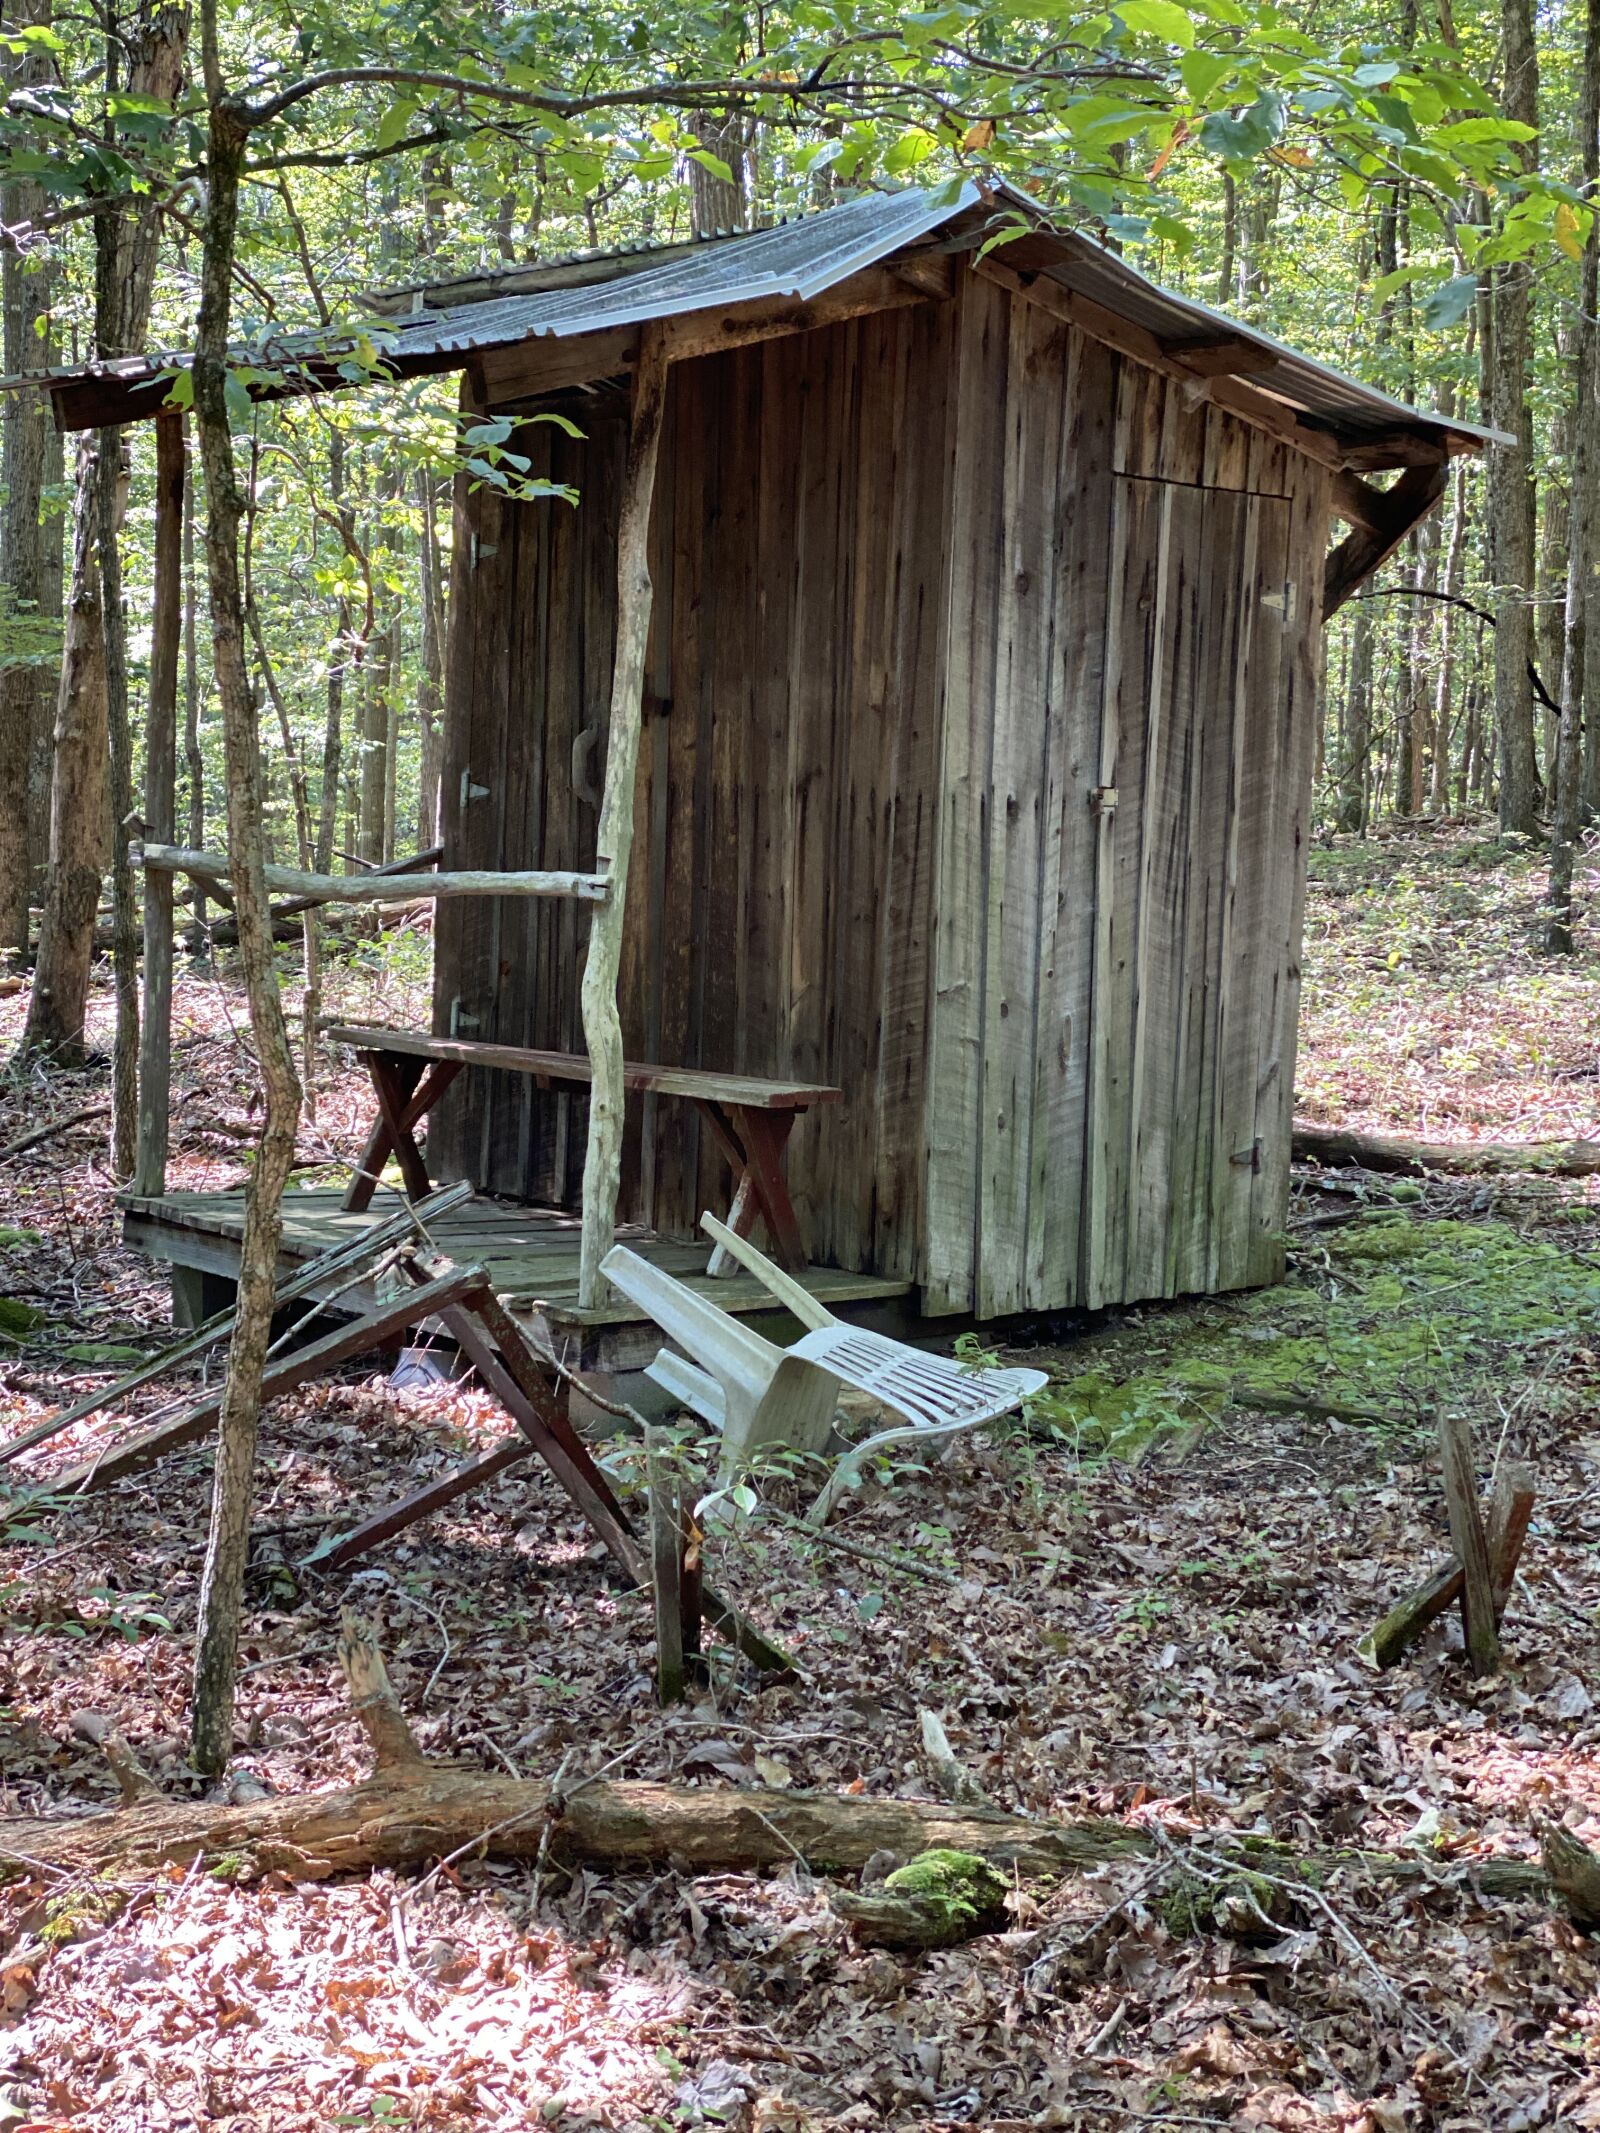 iPhone 11 Pro back dual camera 6mm f/2 sample photo. Wood building, outhouse, toilet photography